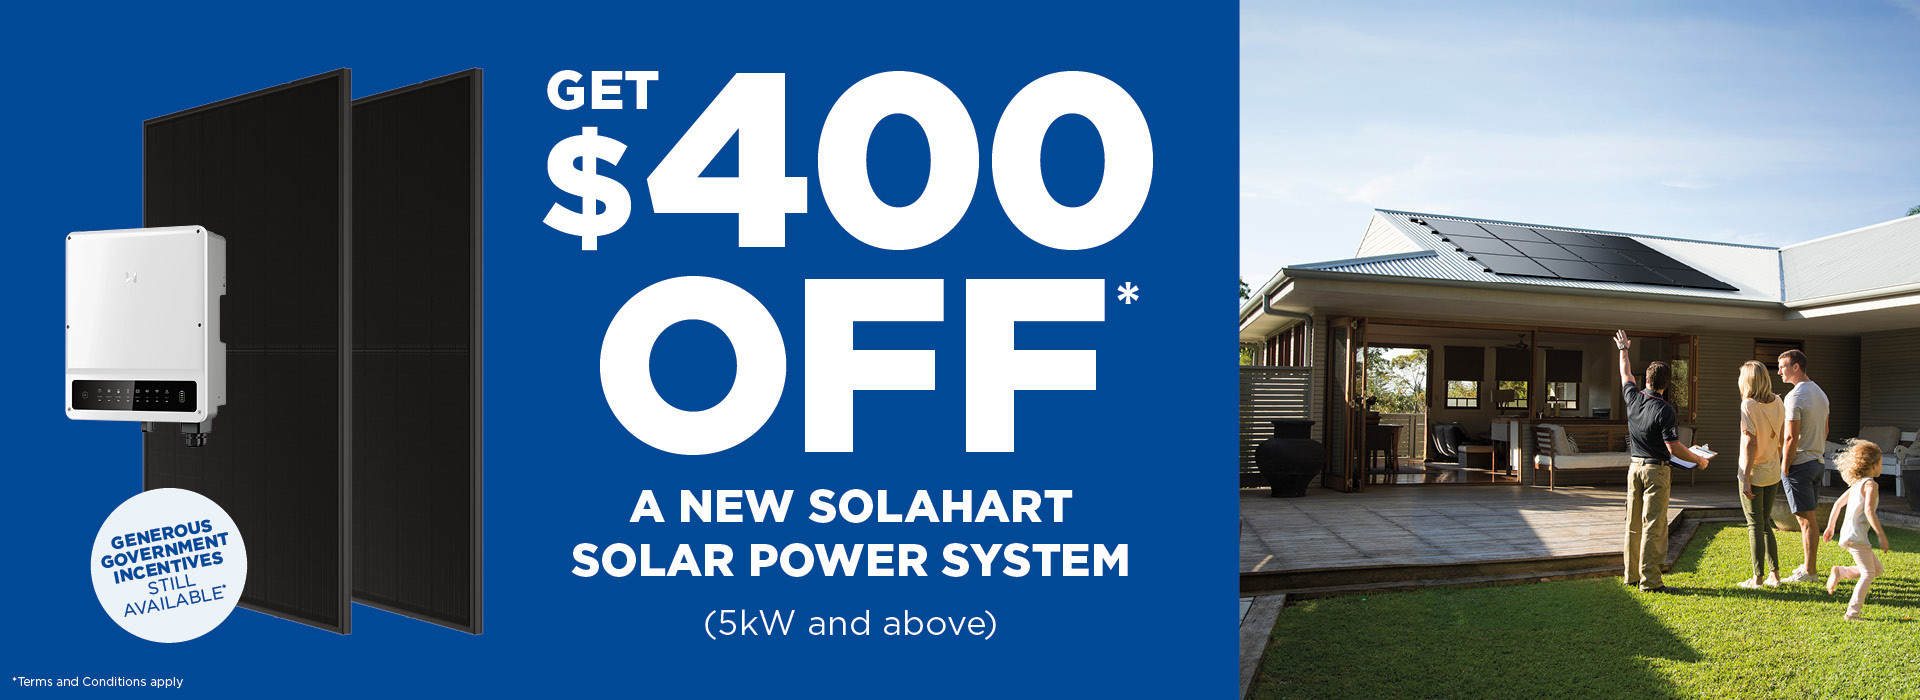 solar hotwater and power special offers